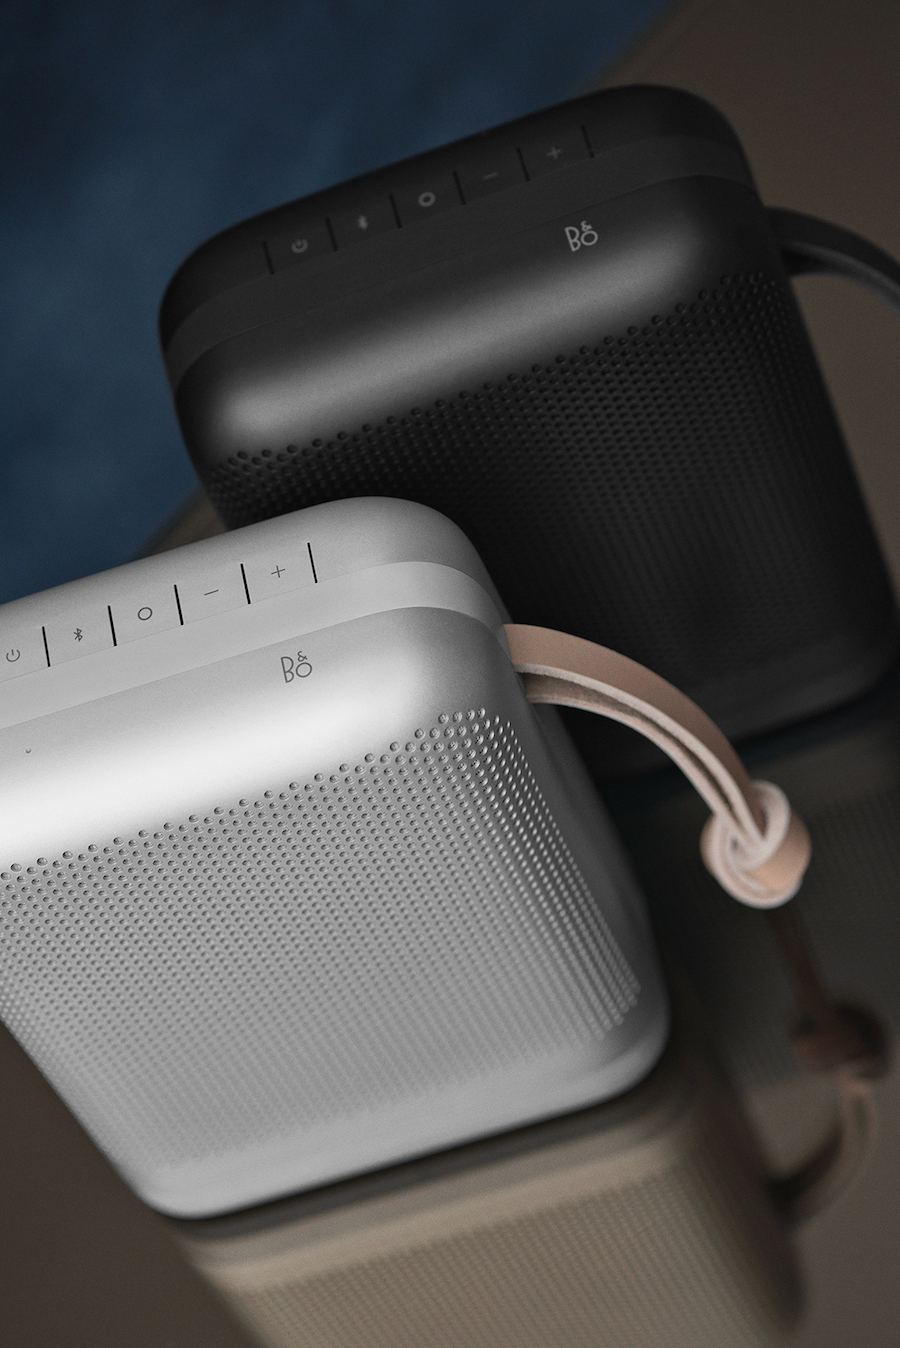 Bang & Olufsen BeoPlay P6 Bluetooth Speaker | The Coolector